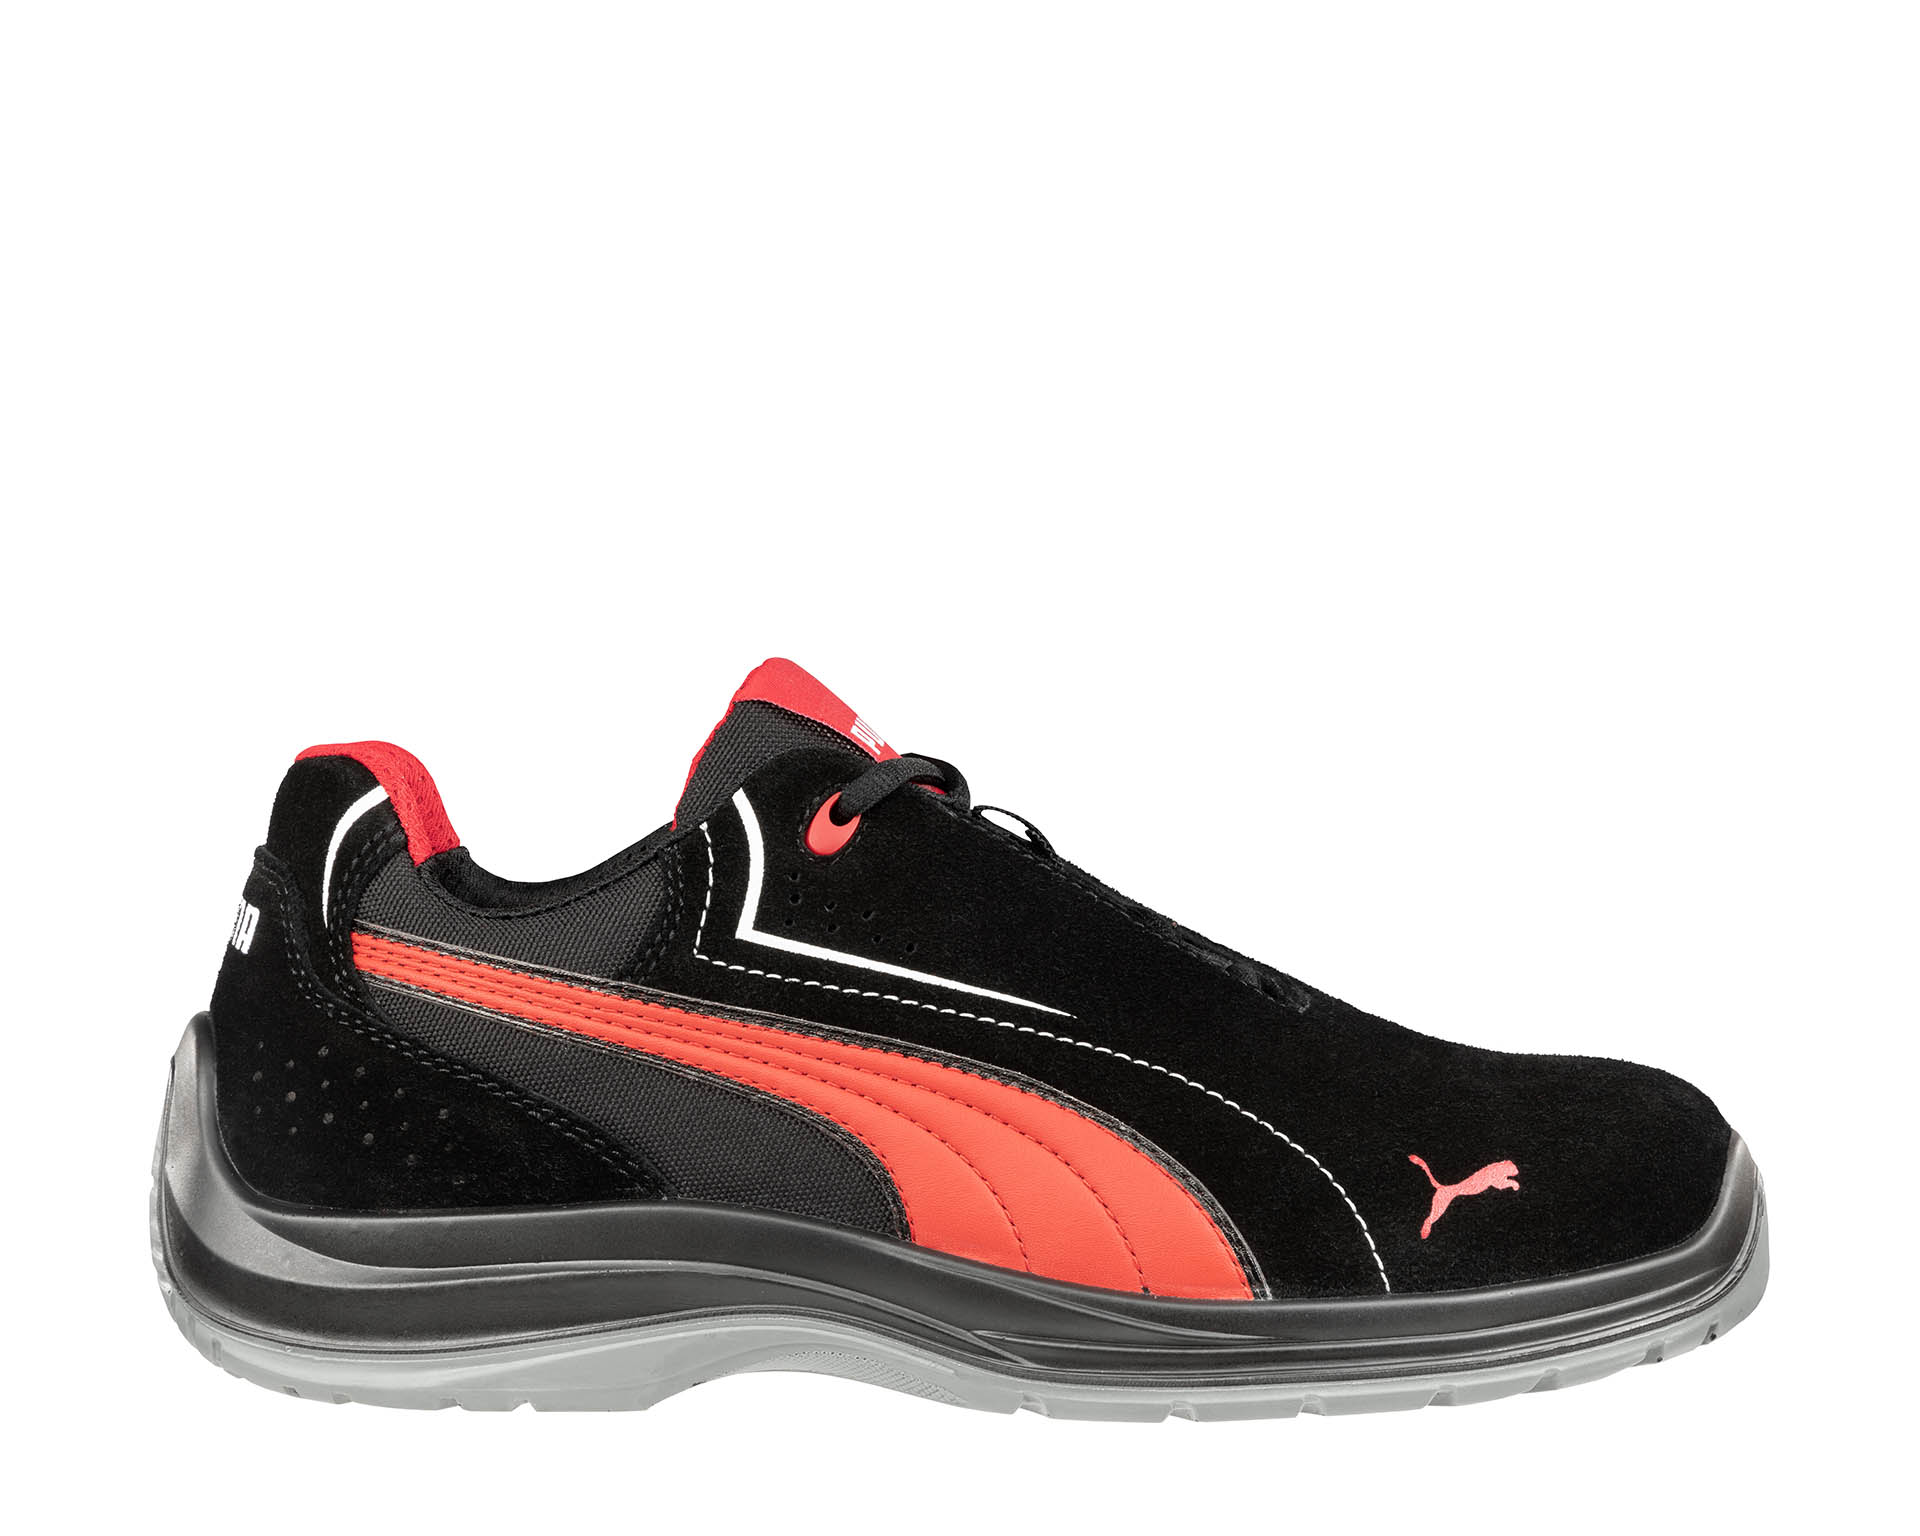 PUMA SAFETY BLACK shoes English SRC LOW S3 Safety ESD Puma TOURING | safety